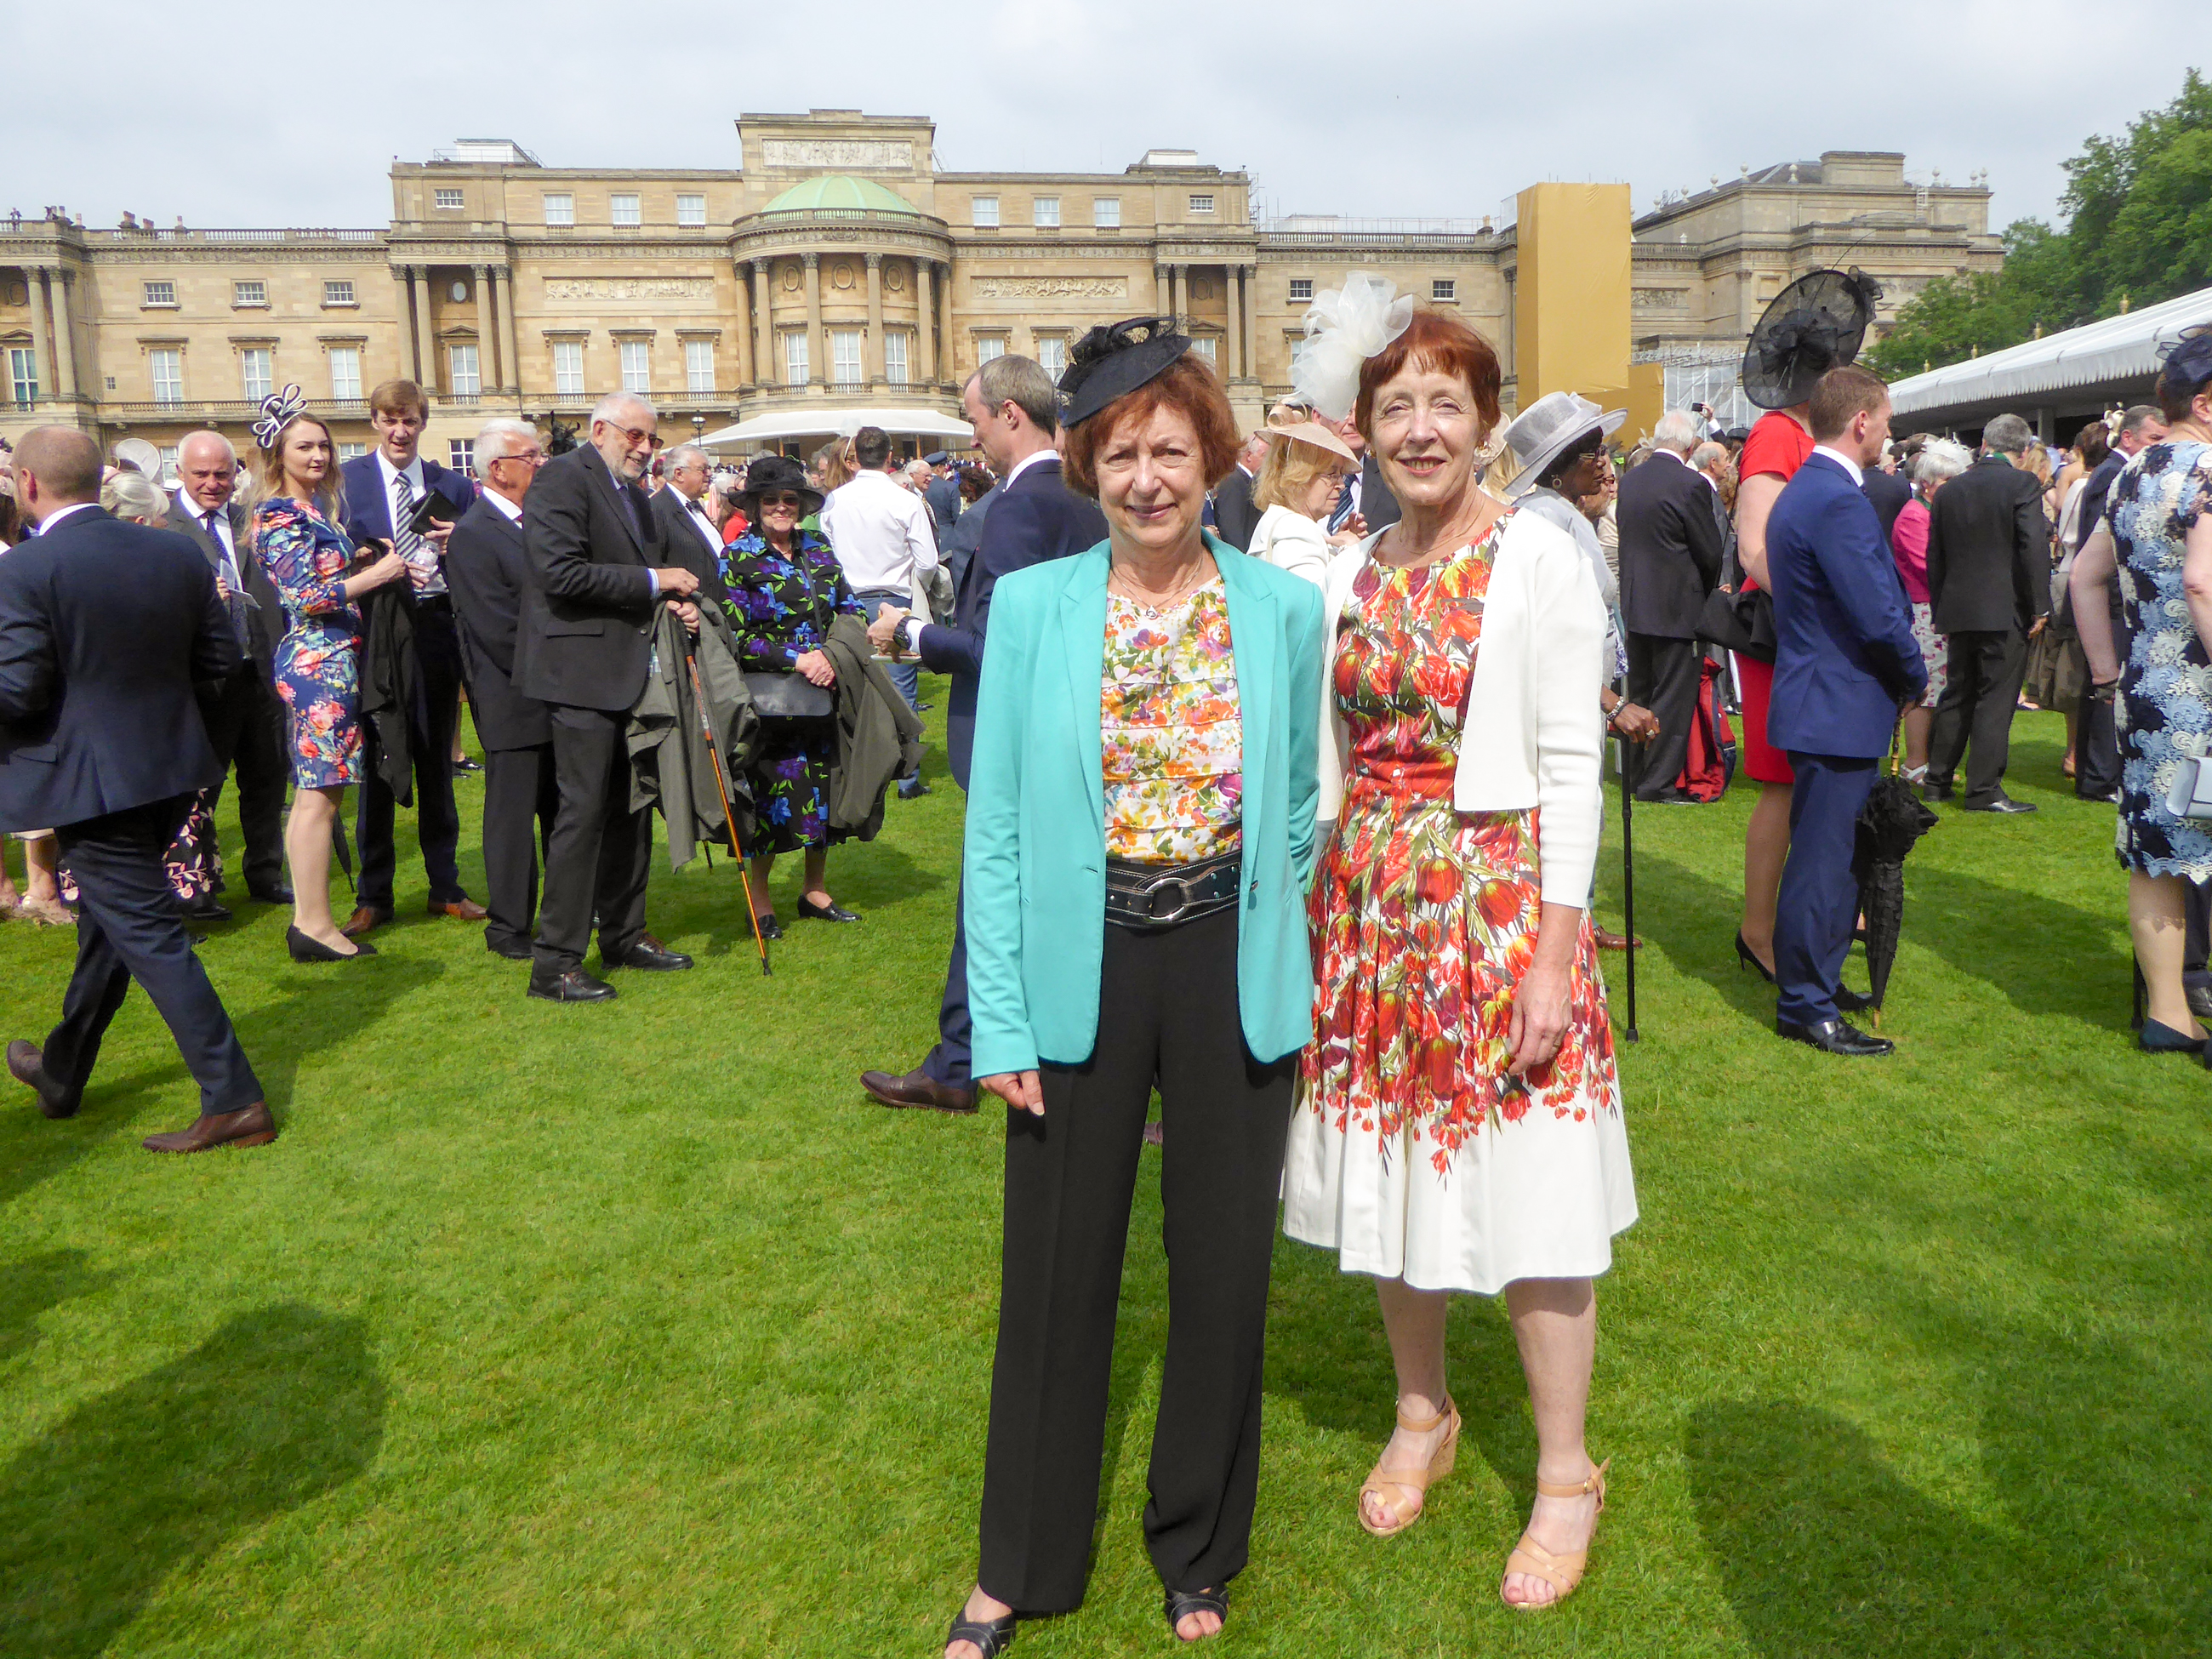 Adele Wilter and Christine Hillis at The Queen's Royal Garden Party